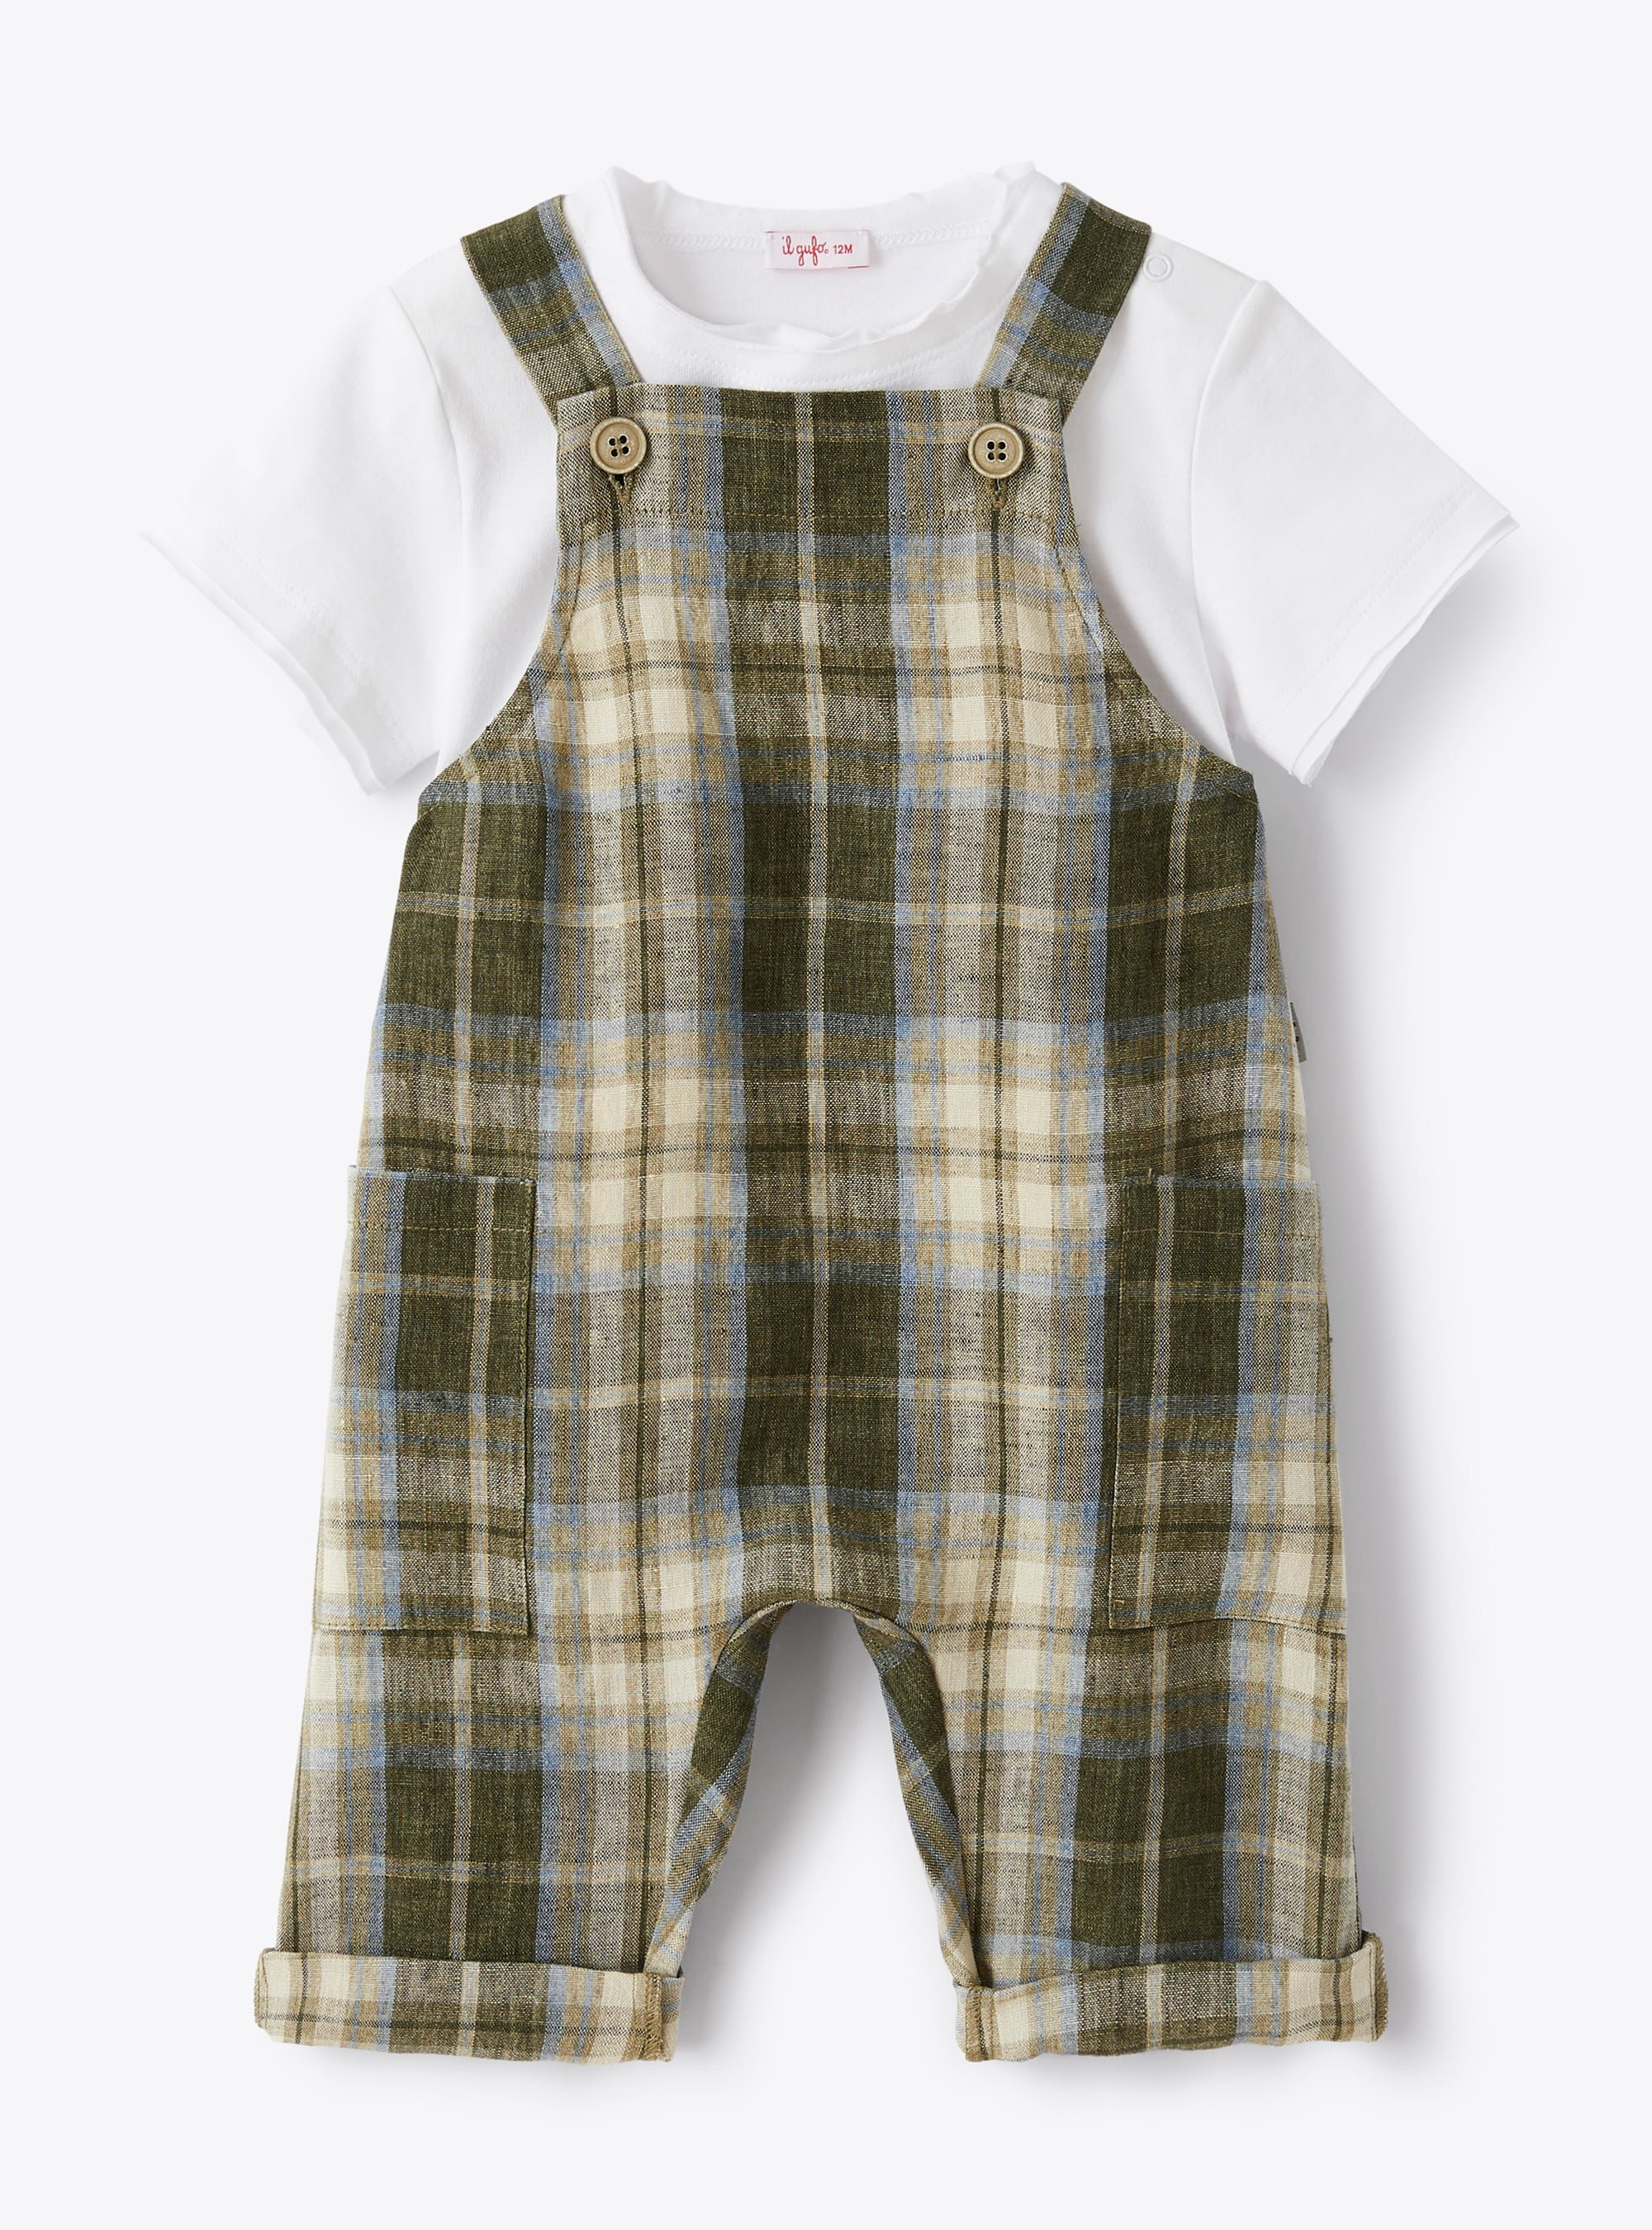 Dungaree set in madras-patterned linen - Two-piece sets - Il Gufo